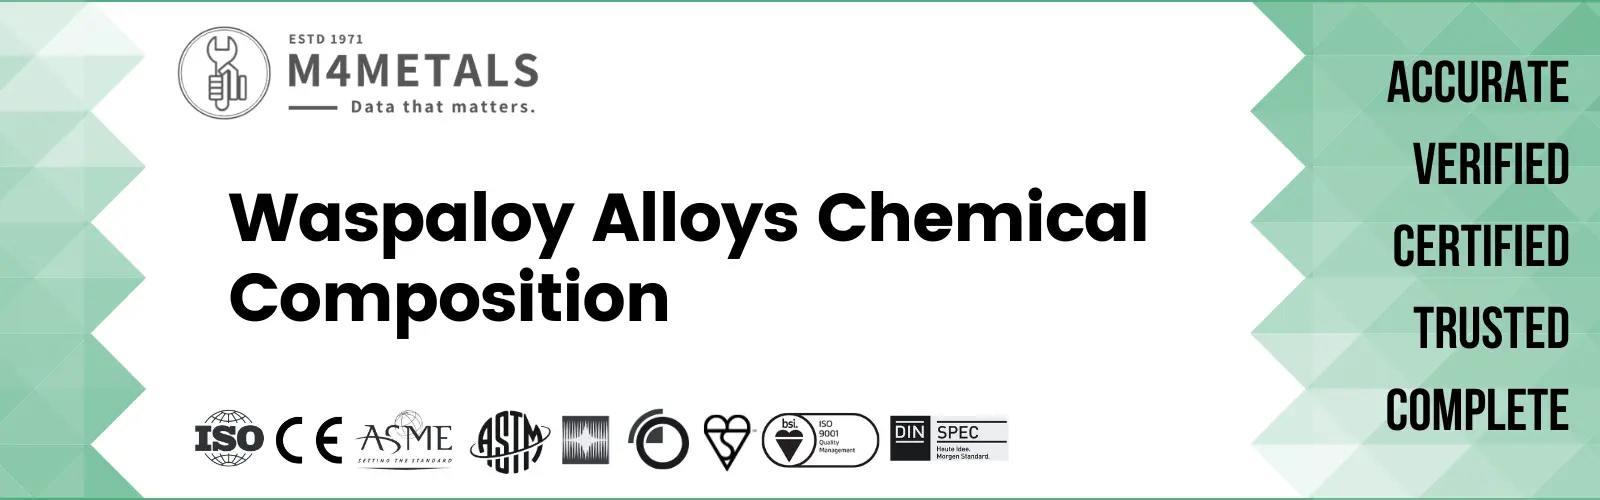 Waspaloy Alloy Chemical Composition